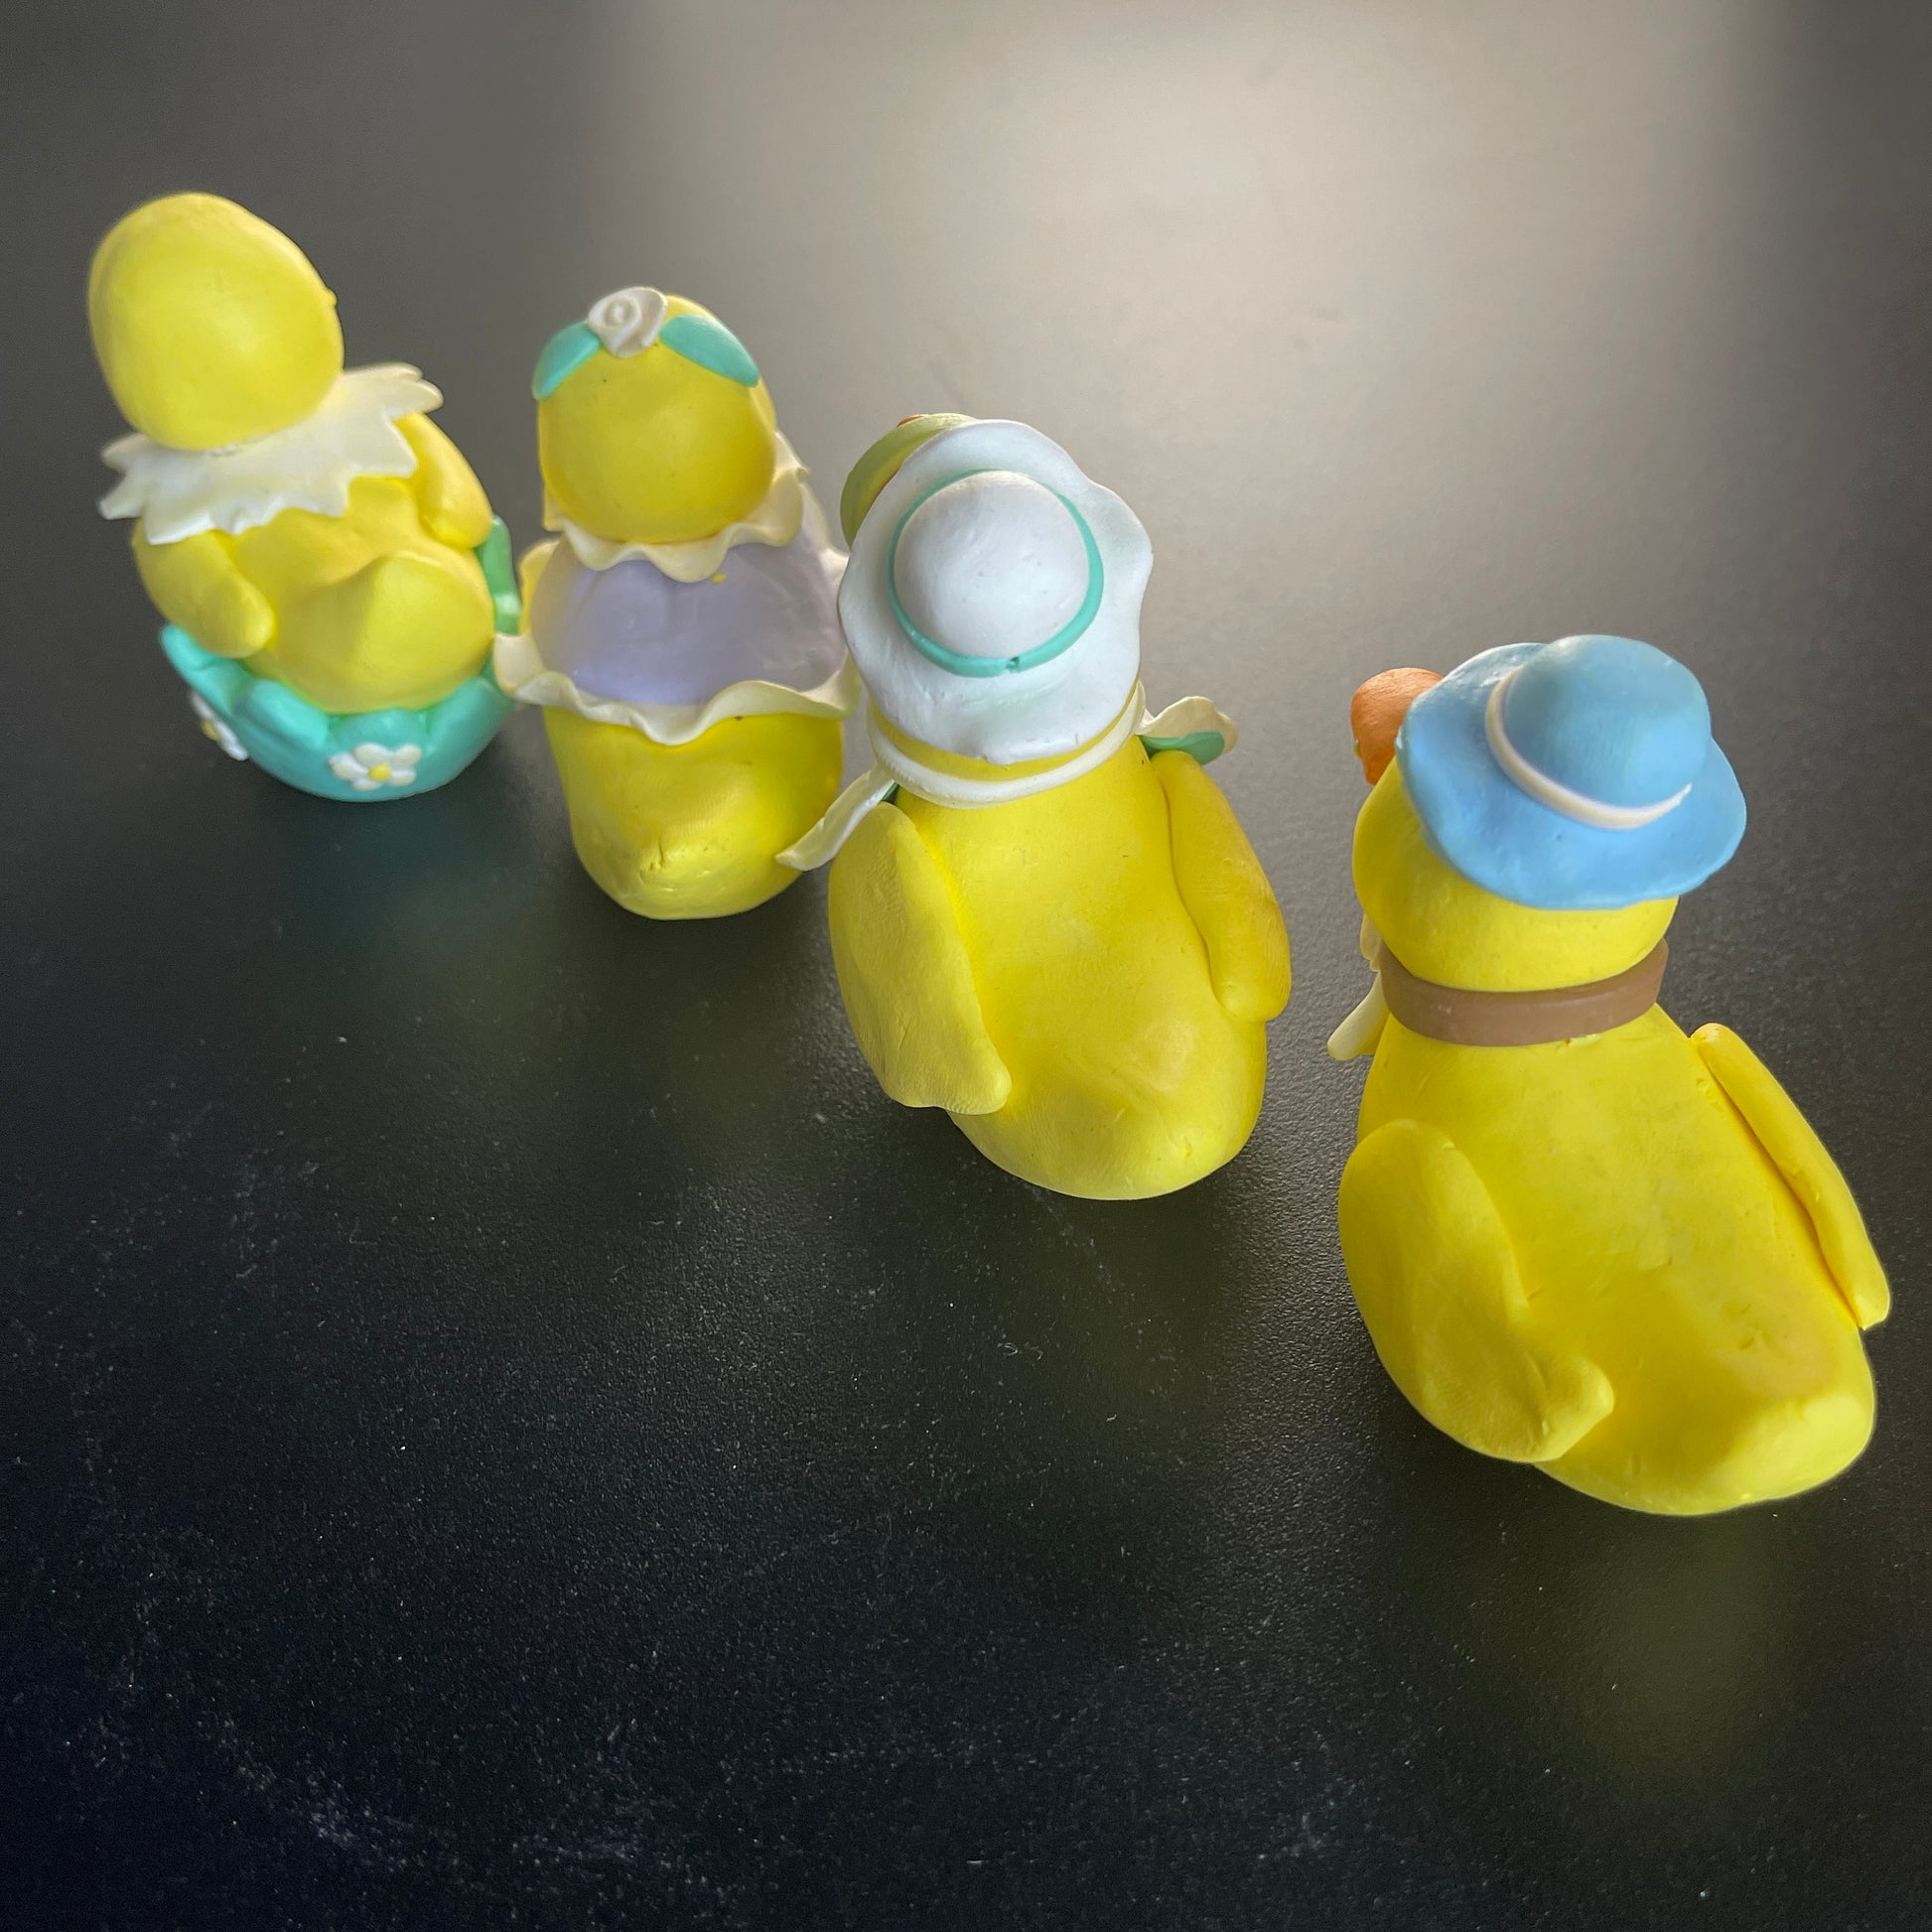 Cute Little Set Of 4 Dressed Up Chicks Miniature Vintage Collectible Spring Decor Figurines